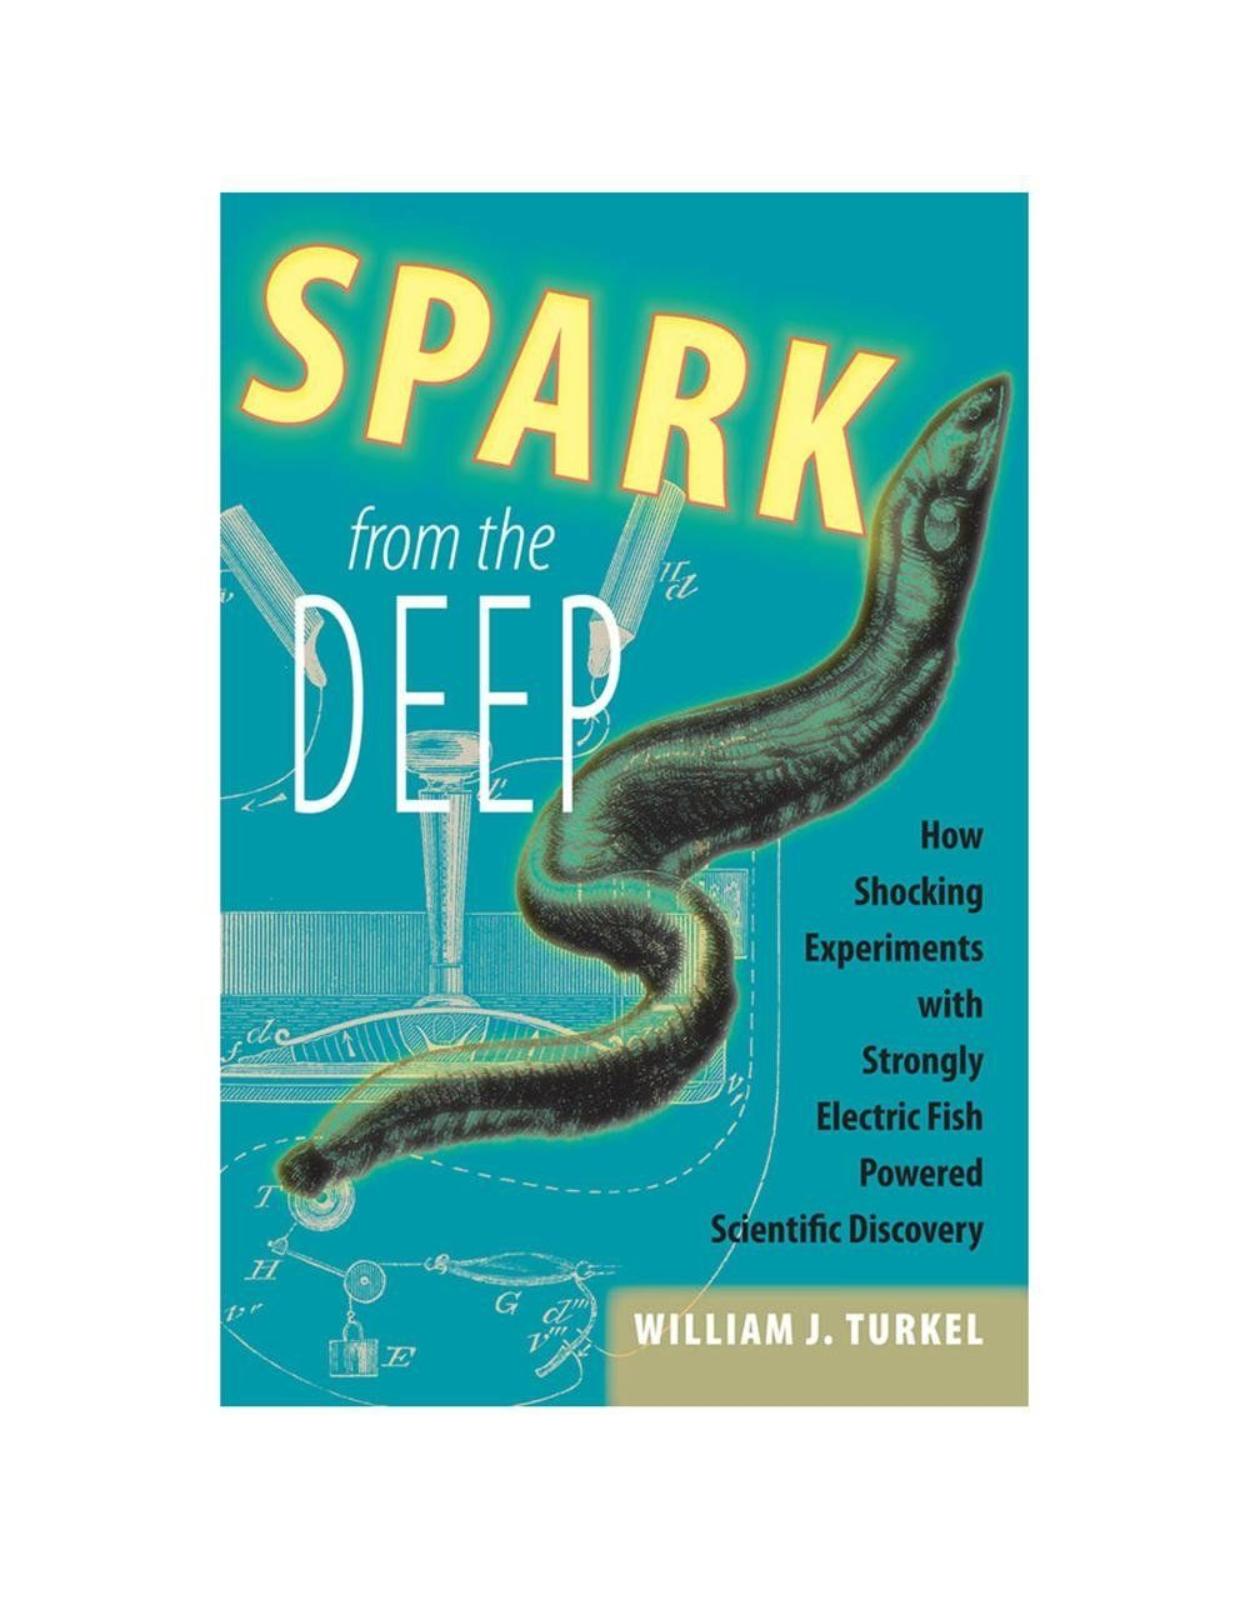 Spark from the Deep. How Shocking Experiments with Strongly Electric Fish Powered Scientific Discovery